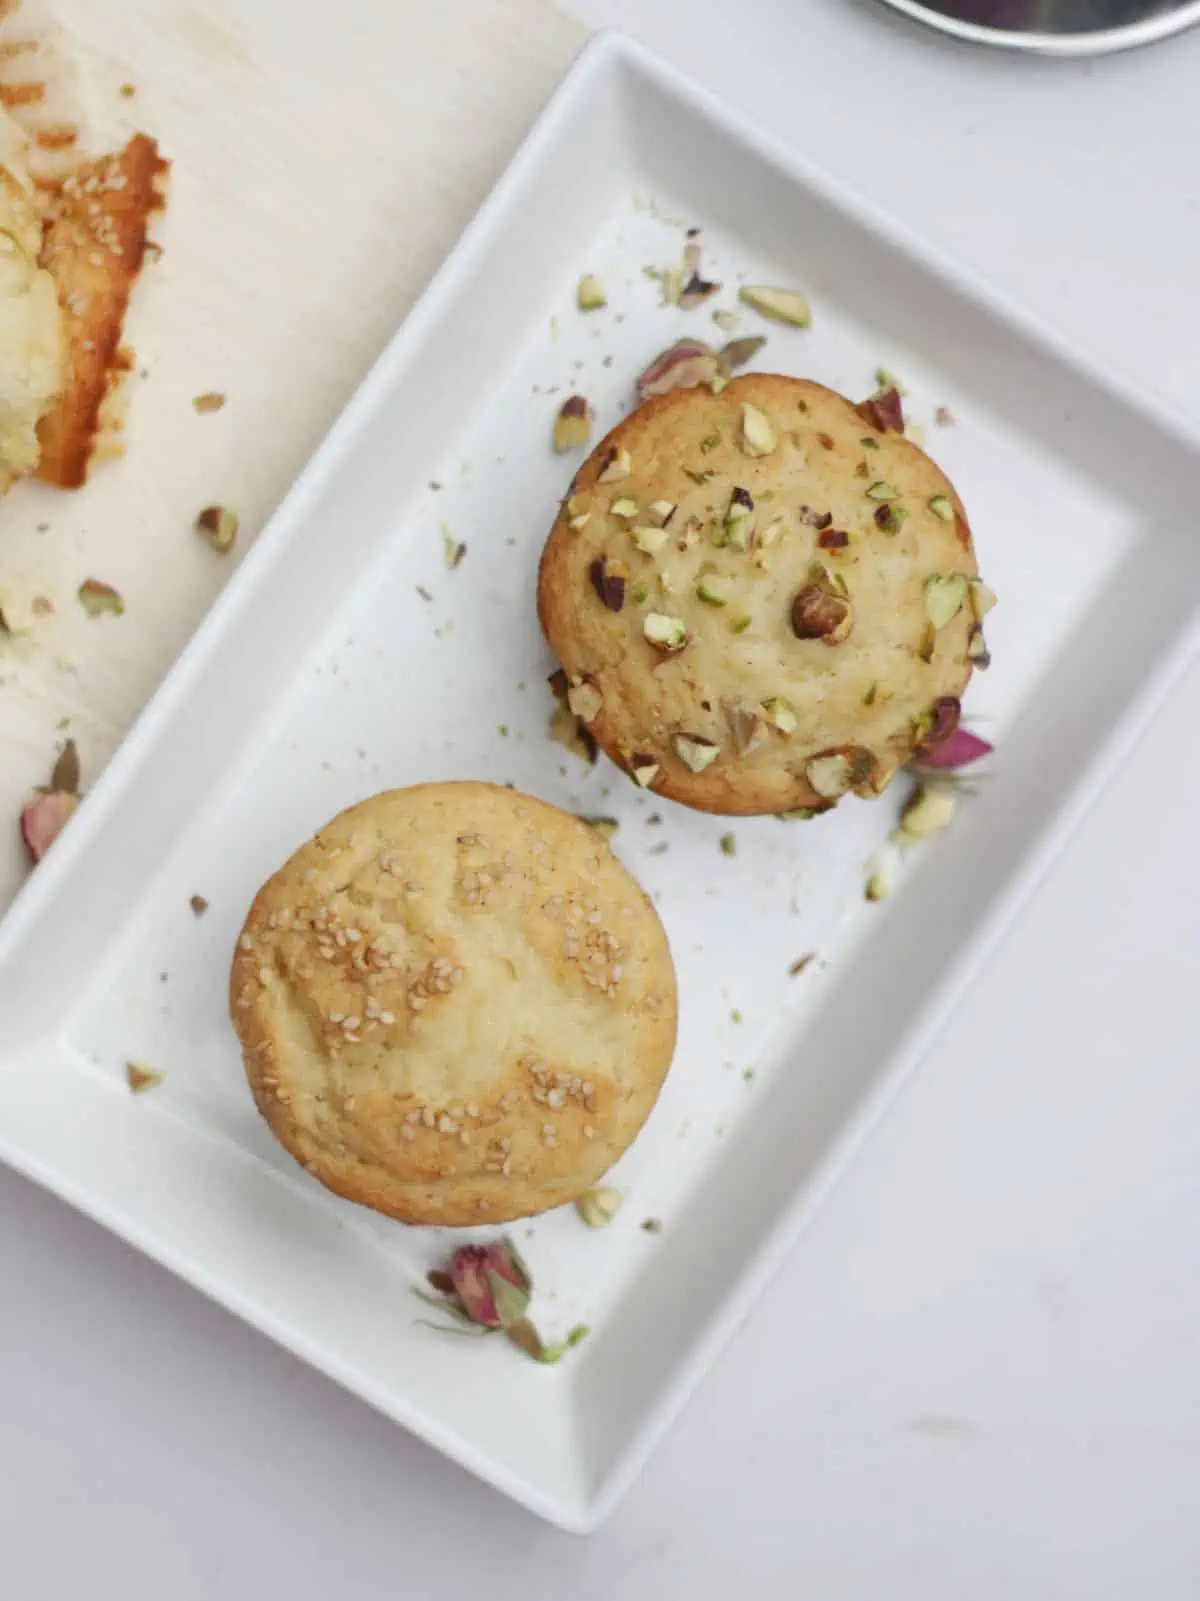 Top view of two muffins garnished with sesame seeds and pistachios.